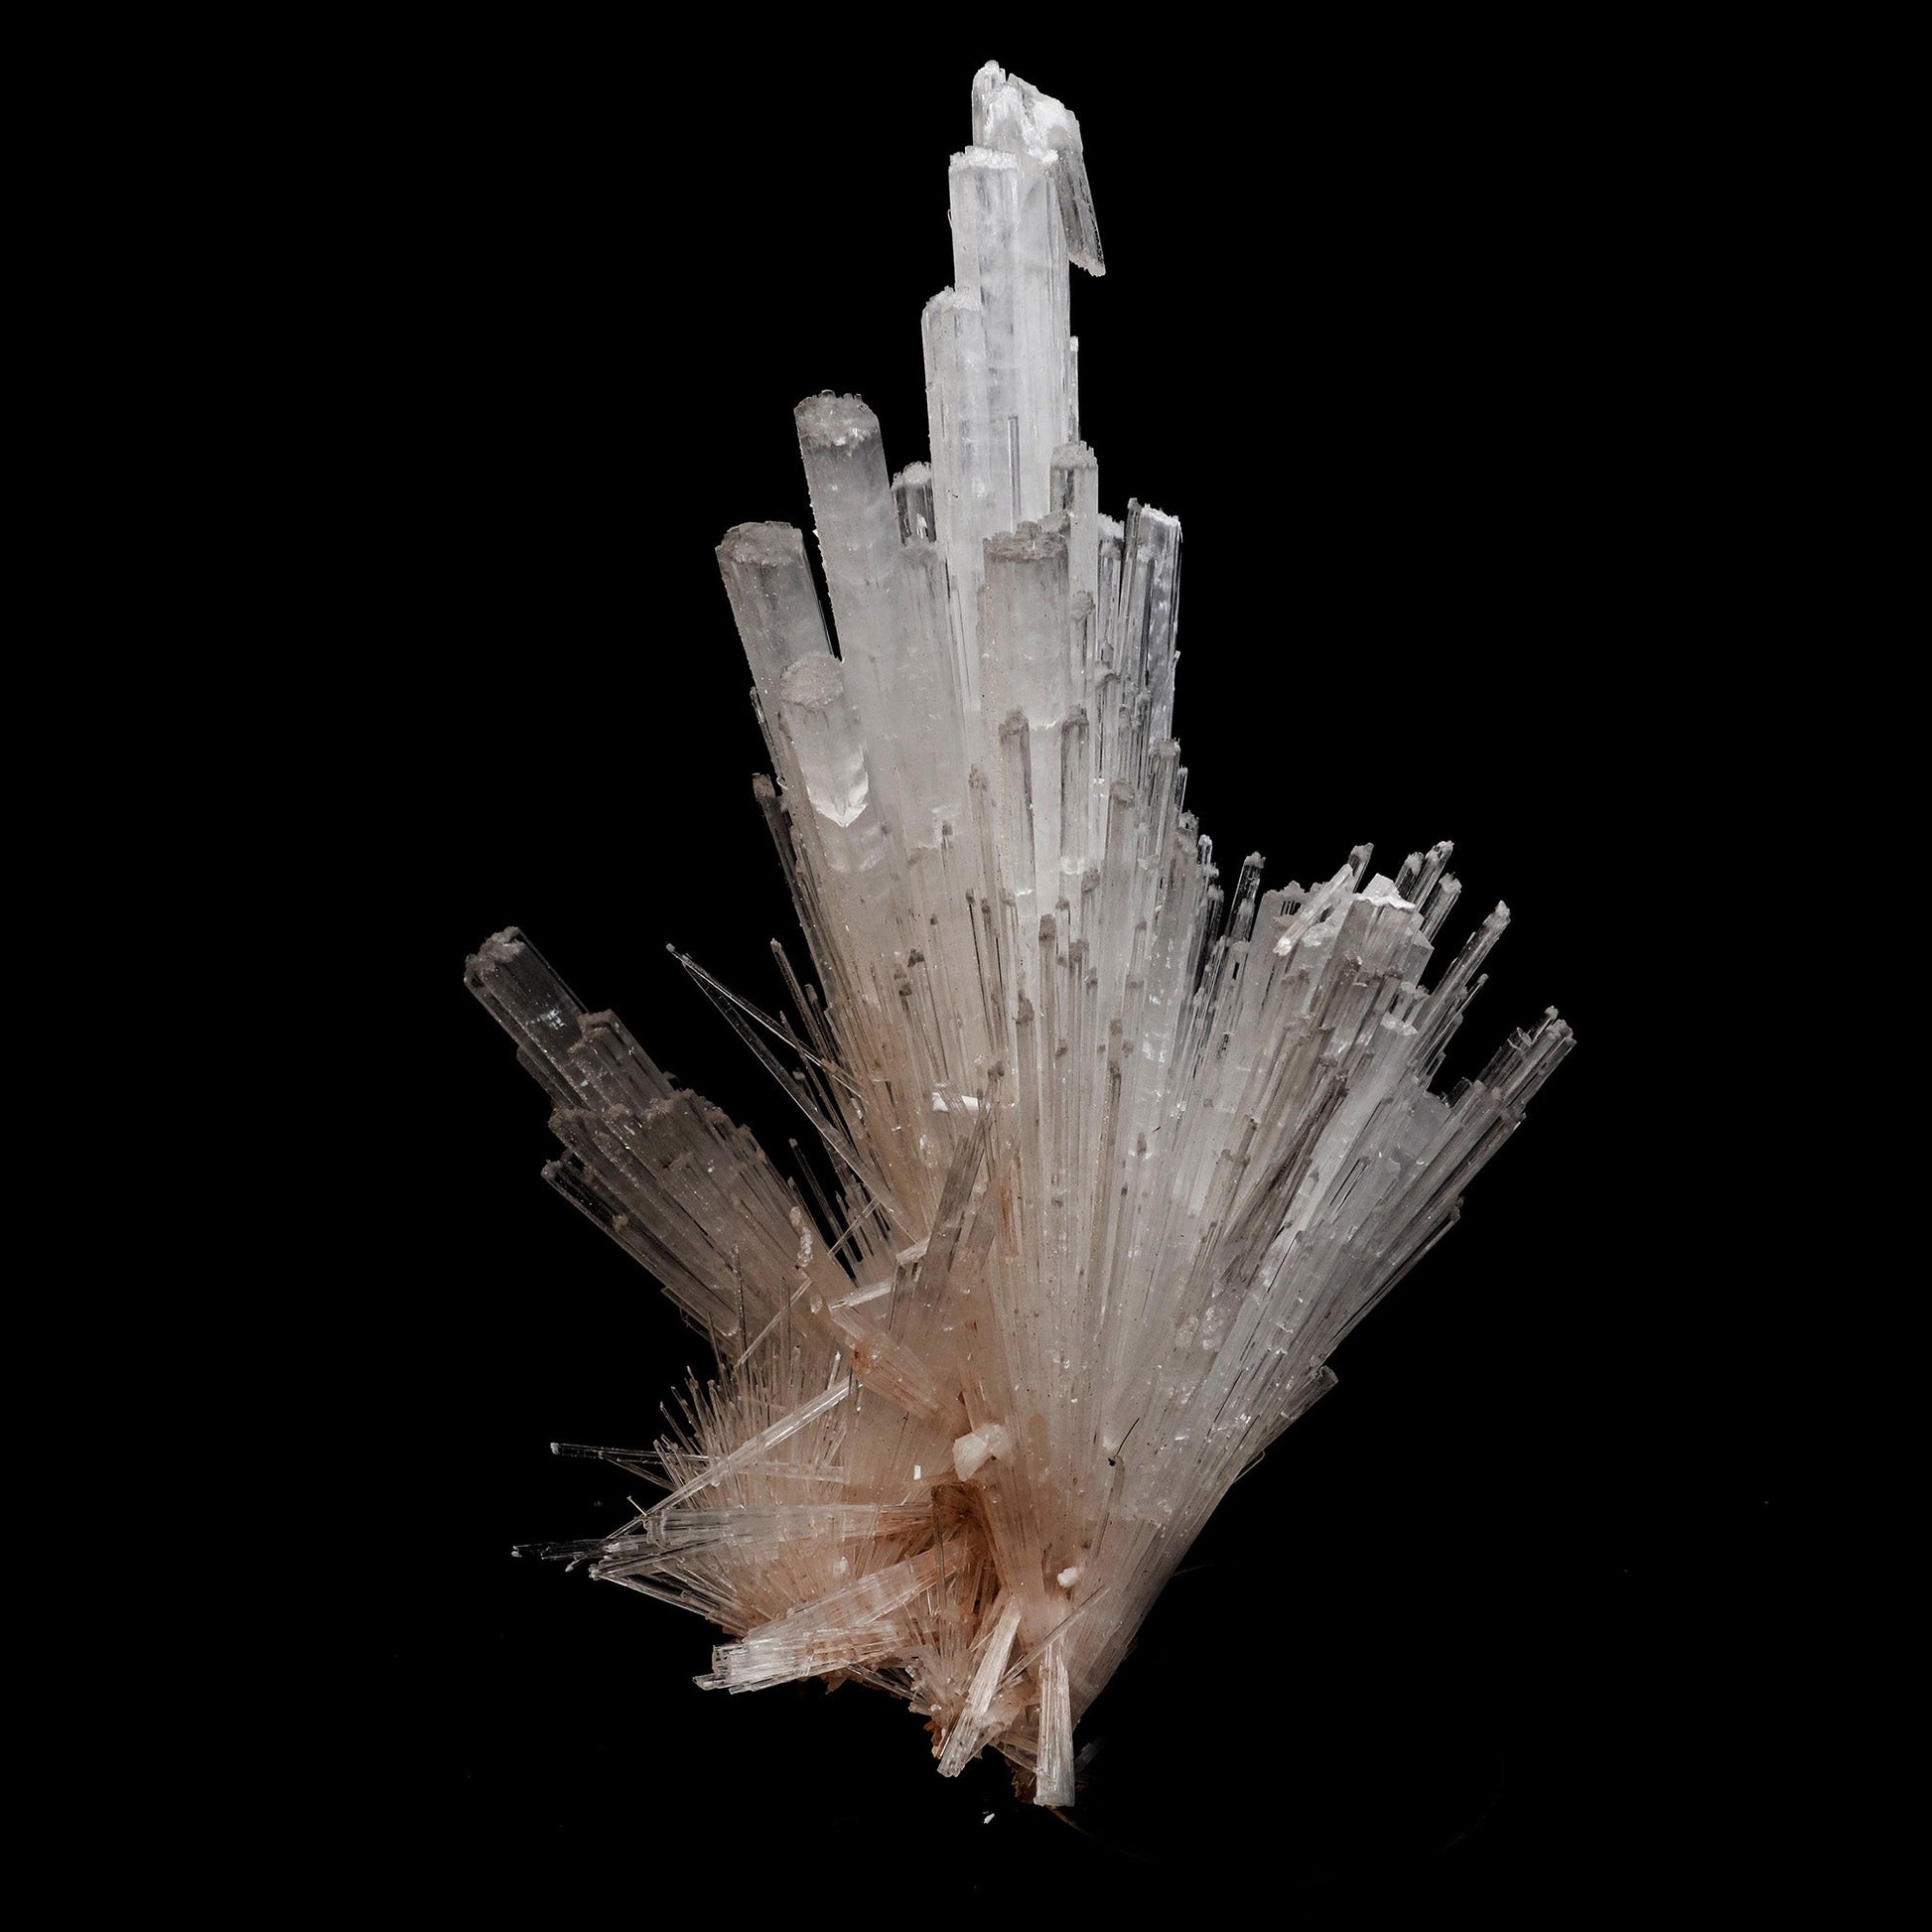 Scolecite Sprays Natural Mineral Specimen # B 5215  https://www.superbminerals.us/products/scolecite-sprays-natural-mineral-specimen-b-5215  Features: Recent discoveries in Nashik have yielded some spectacular intergrown jackstraw sprays of glassy, iridescent, clear to translucent scolecite prism. STUNNING. The stunning crystals extend in every direction. Primary Mineral(s): ScoleciteSecondary Mineral(s): N/AMatrix: N/A 8 Inch x 6 InchWeight : 630 